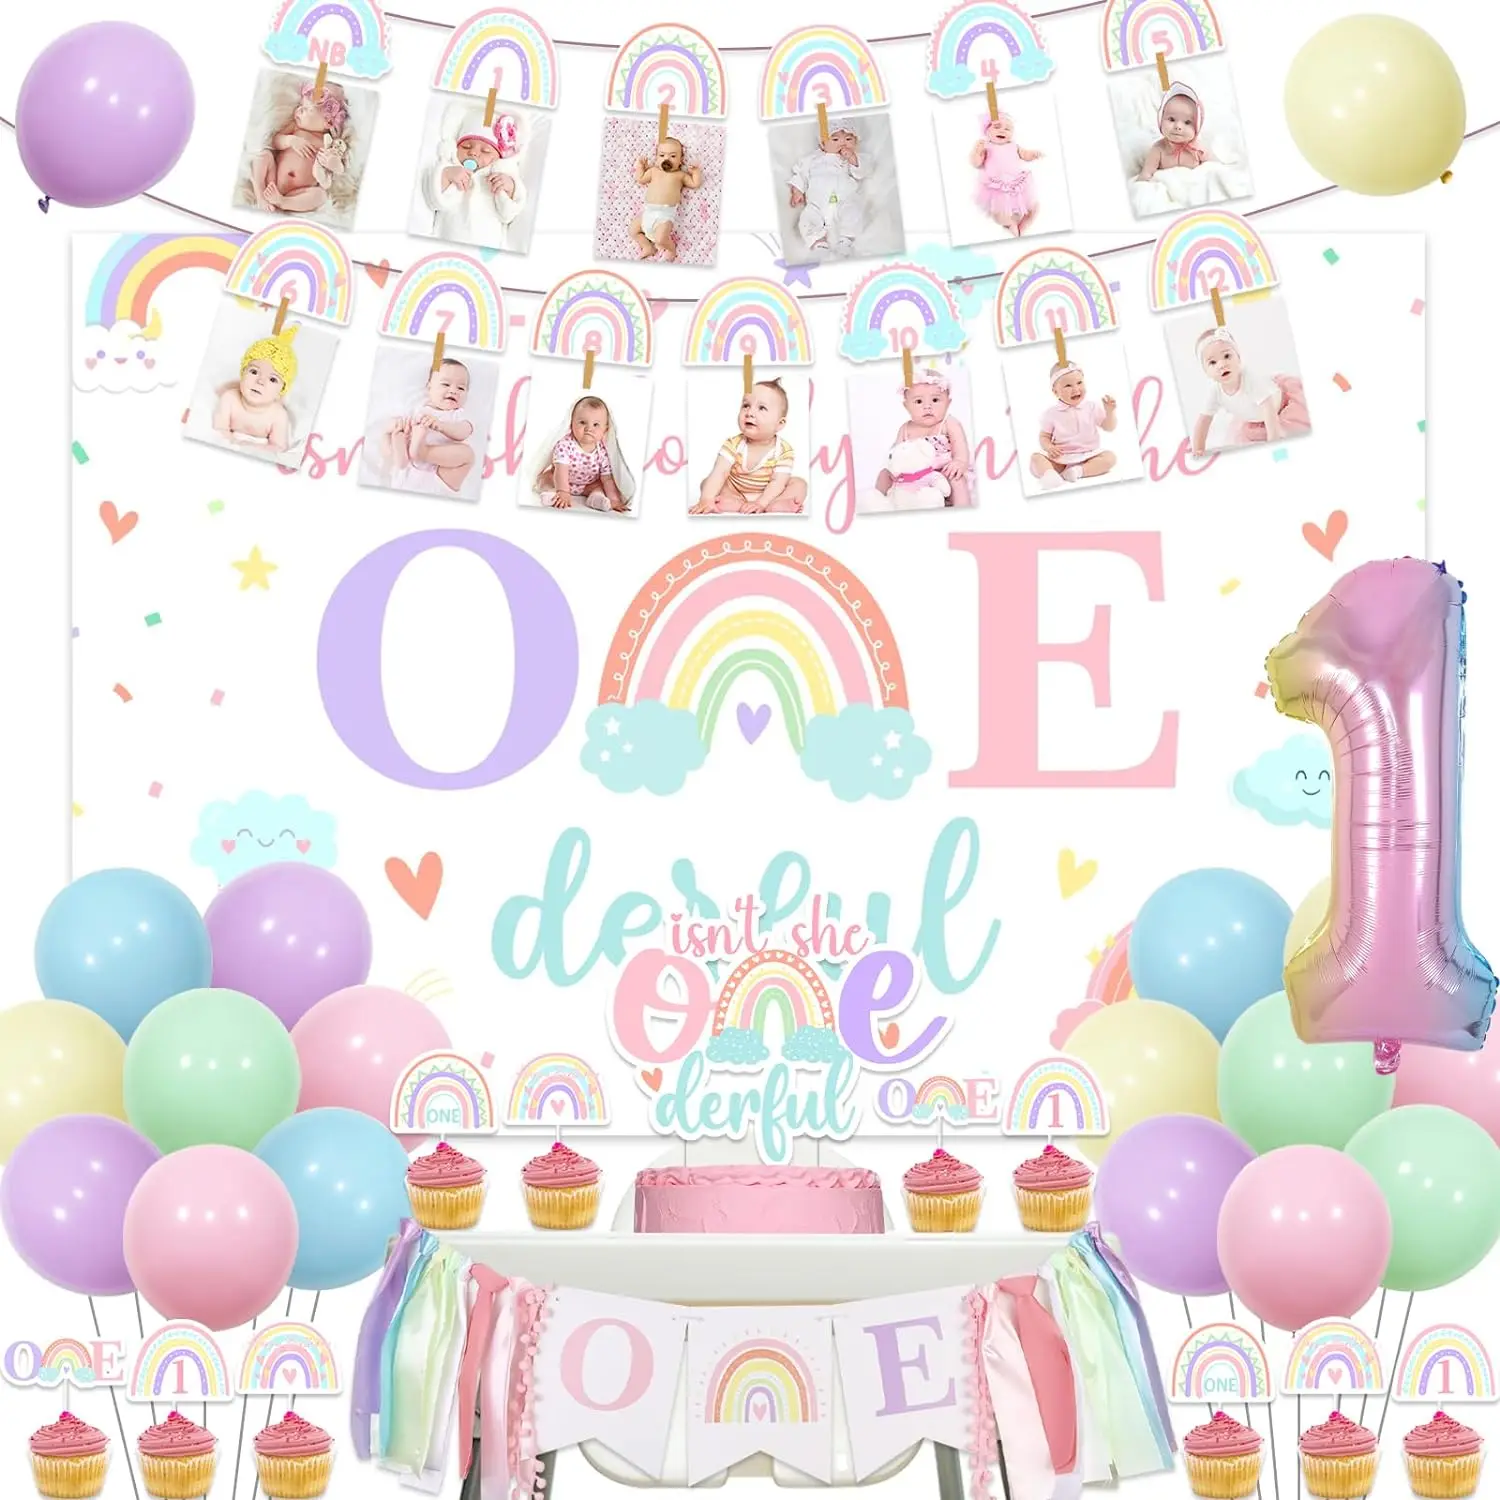 

Pastel Rainbow 1st Birthday Decor Isn't She Onederful Backdrop Cake Toppers Balloons One Highchair Photo Banner Number1 Balloon